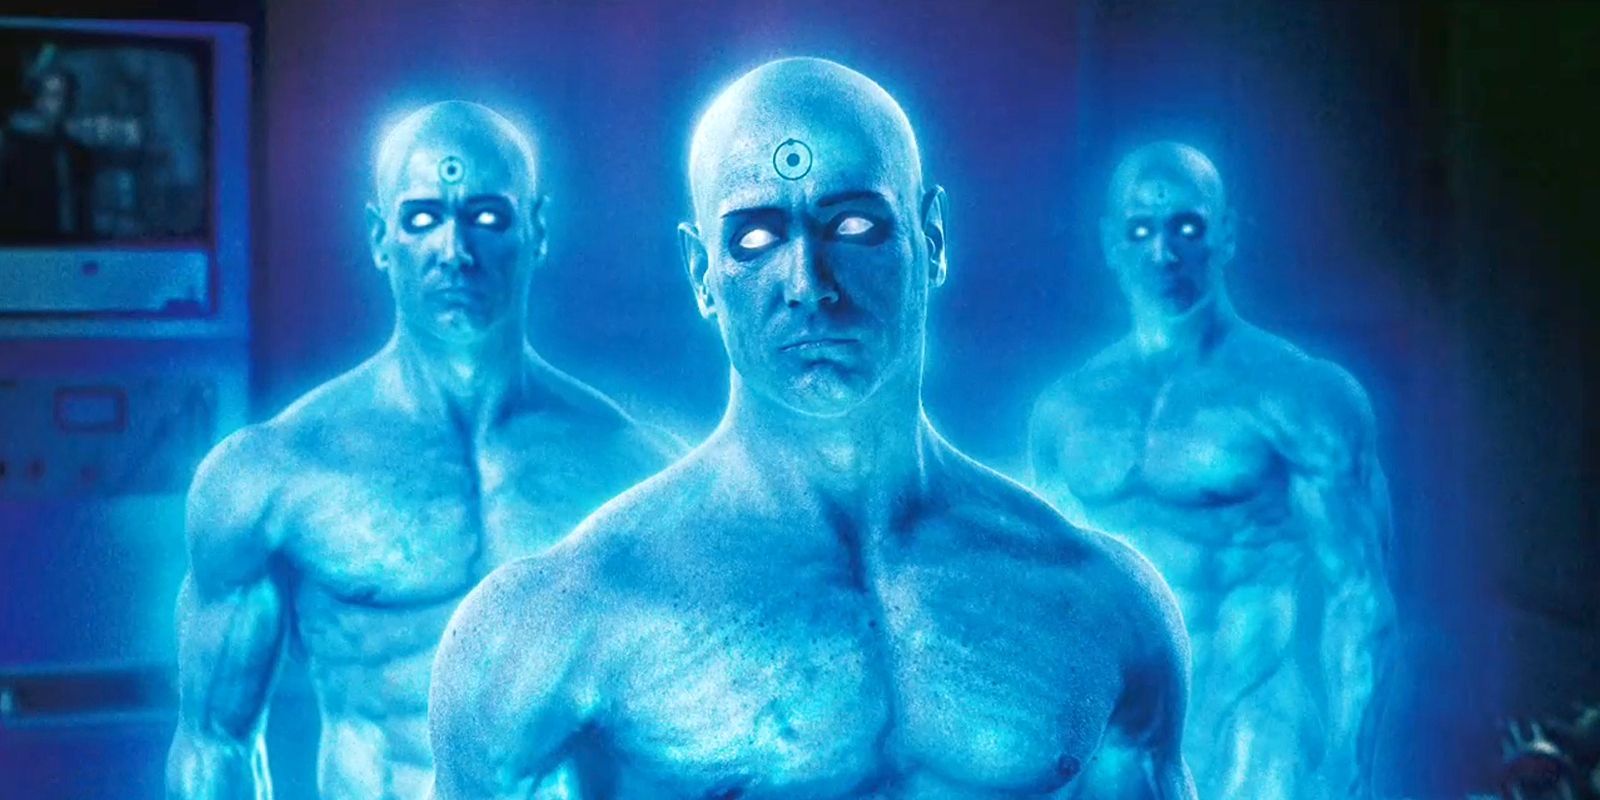 1. Dr. Manhattan This is a character from the “Watchmen” comics, and he may be the most powerful character of any print or digital media. Billy Crudup played him in Zack Snyder’s 2009 masterpiece “Watchmen”. He can create lives on any planet and even build that planet as well. Moreover, Dr. Manhattan can kill someone with a flick of a single finger and is also the wisest being of his universe. To think how he was just an ordinary scientist once who forgot his watch in a laboratory just when they were starting a radioactive experiment to what he is now- it’s astonishing.